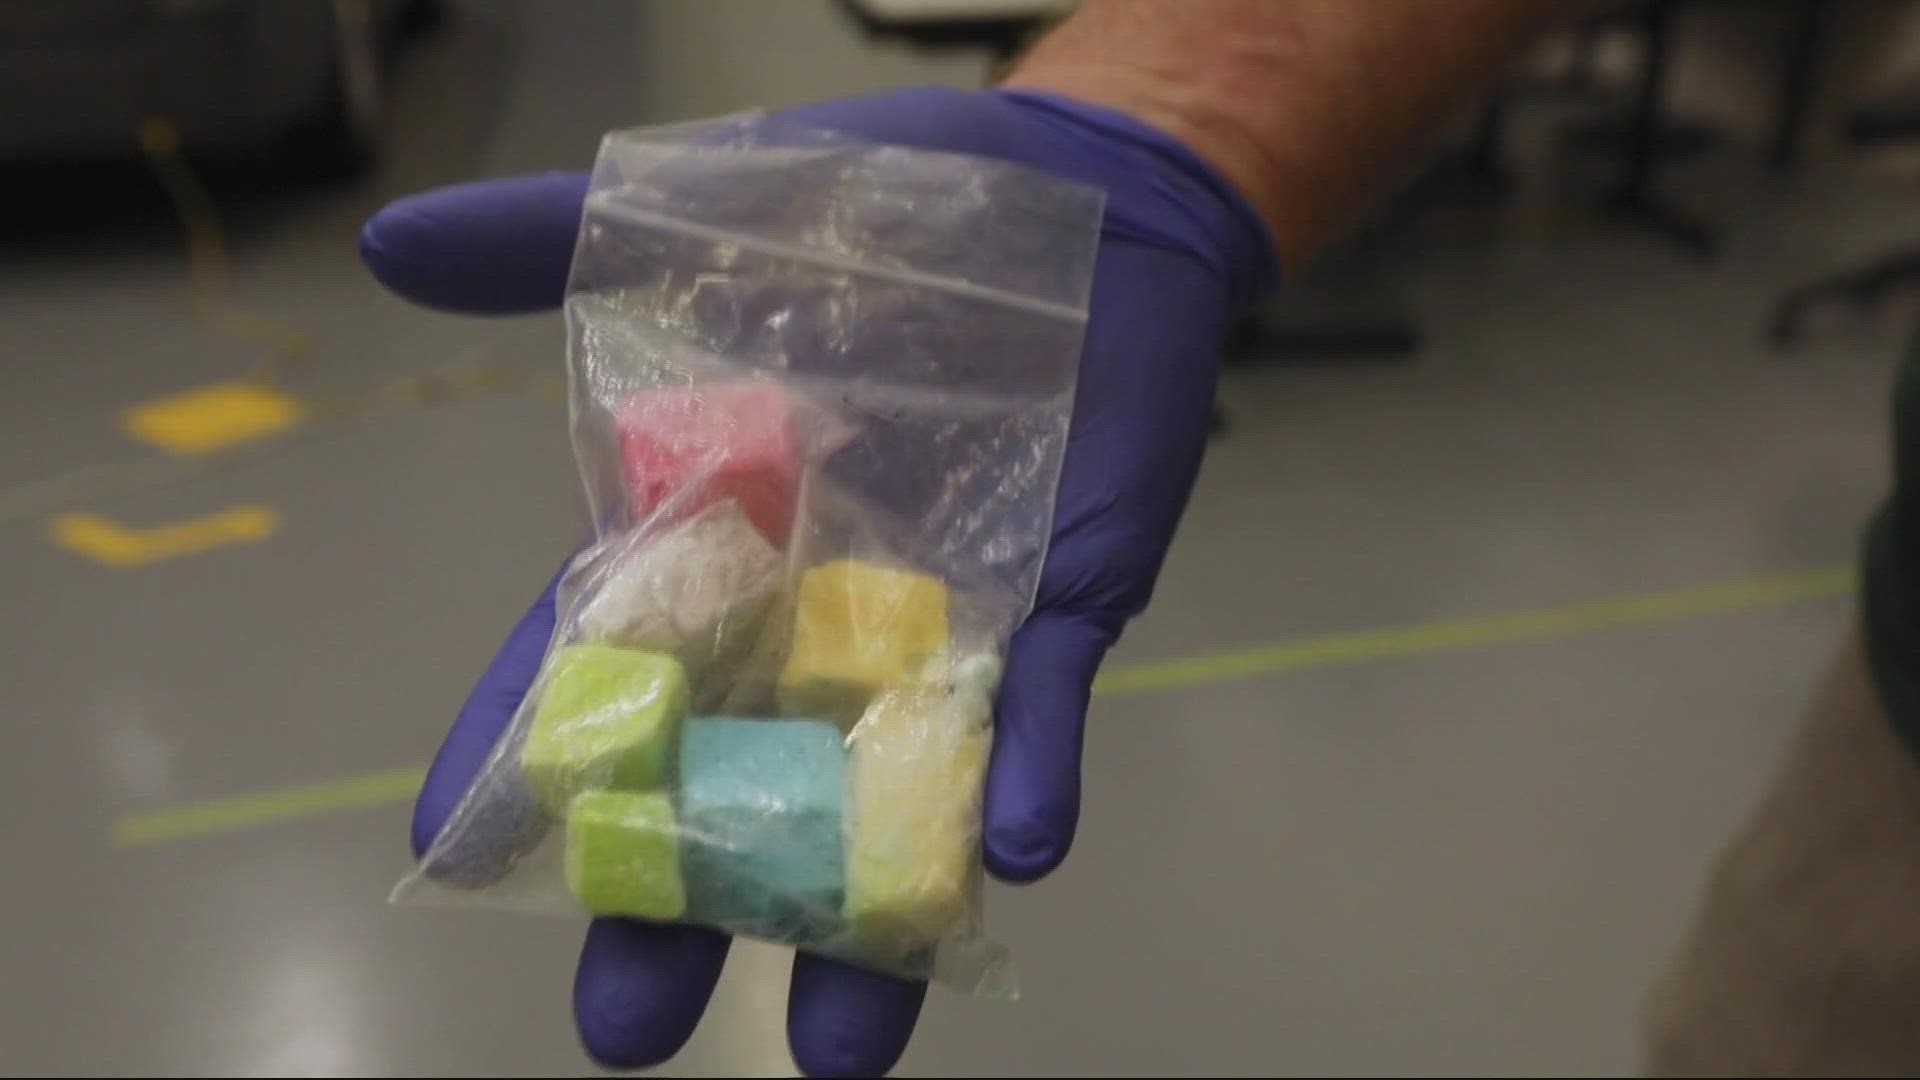 Multnomah County deputies found ‘rainbow fentanyl’ during a recent bust. The variant is more potent and dangerous than more common blue pills.